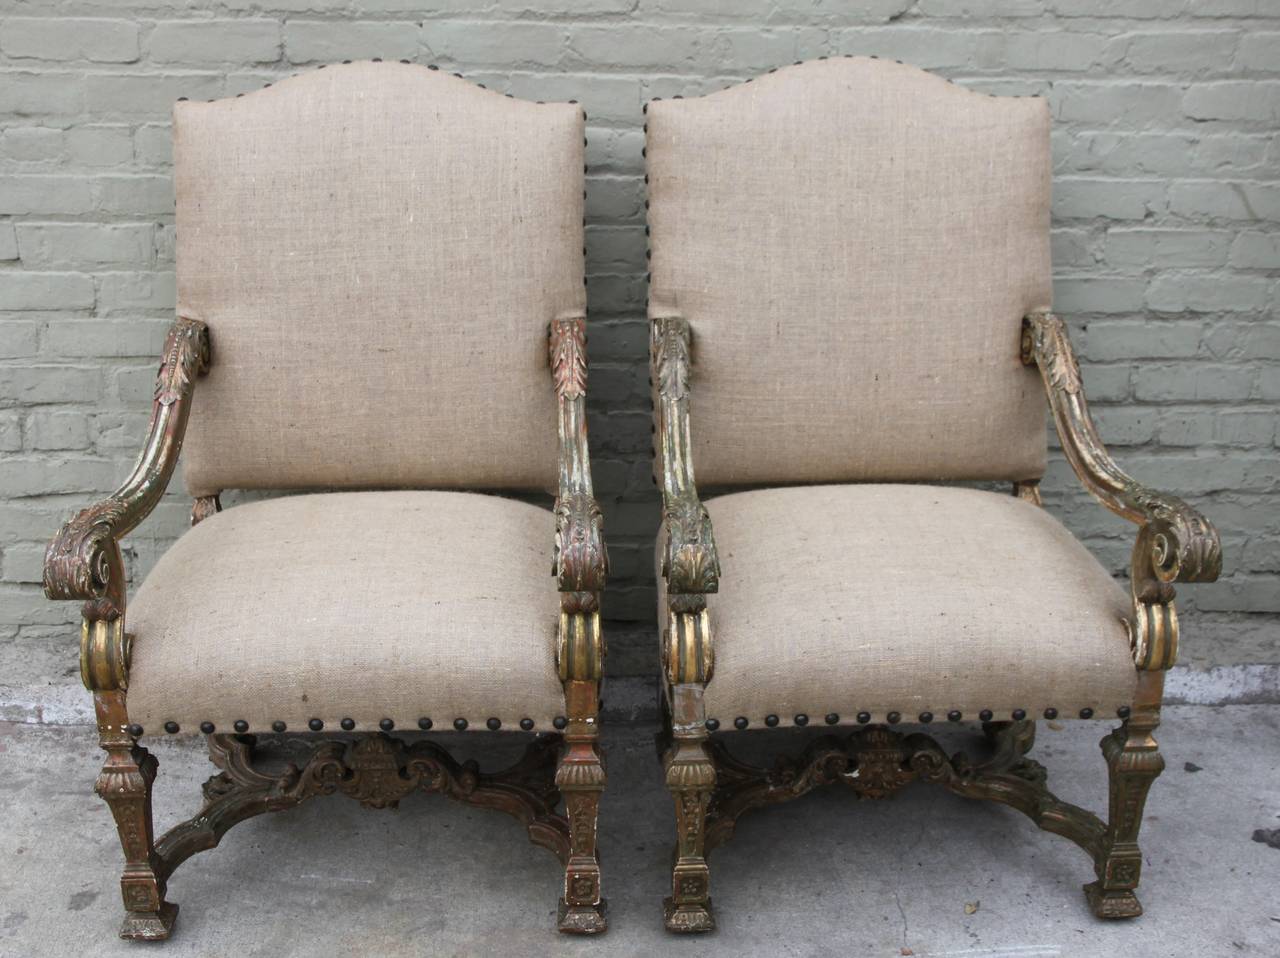 Pair of Italian painted and parcel-gilt armchairs newly upholstered in burlap textile with nailhead trim detail.